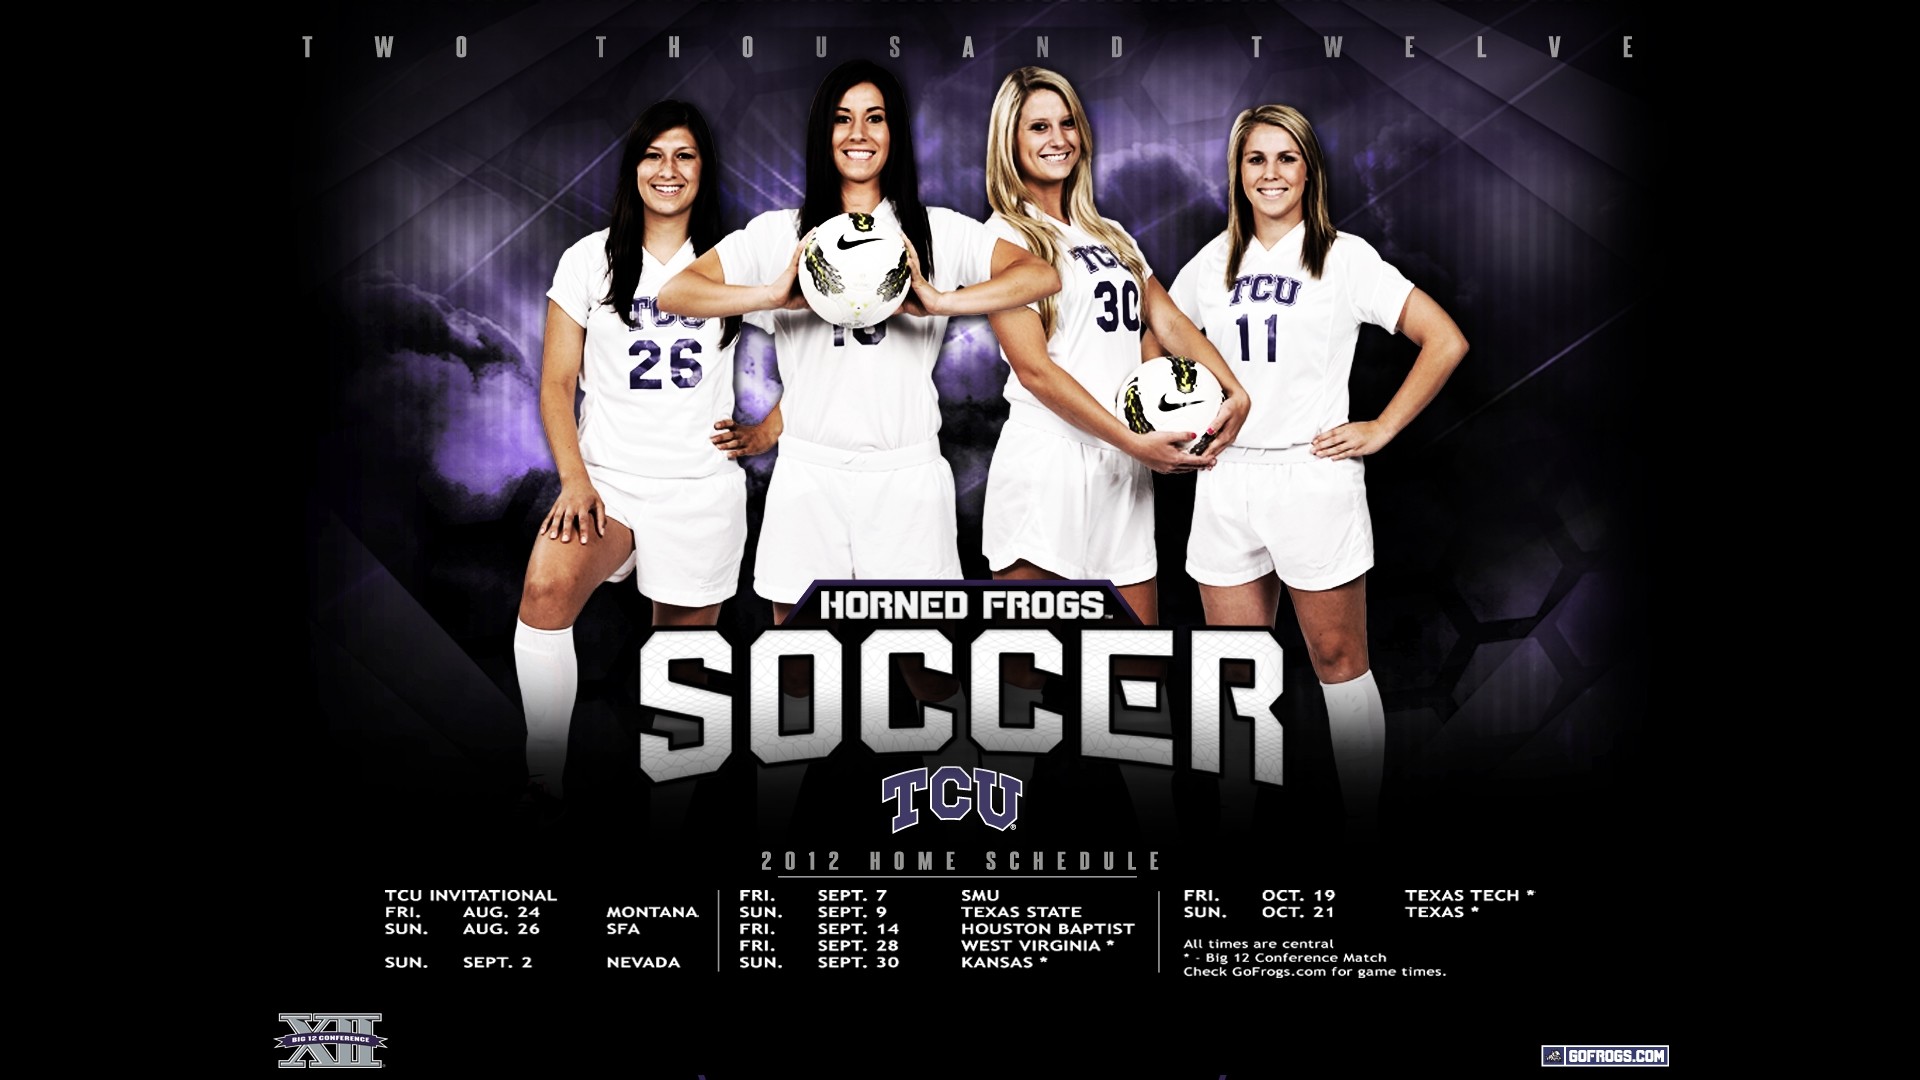 1920x1080 Texas Christian University Wallpapers (26 Wallpapers)